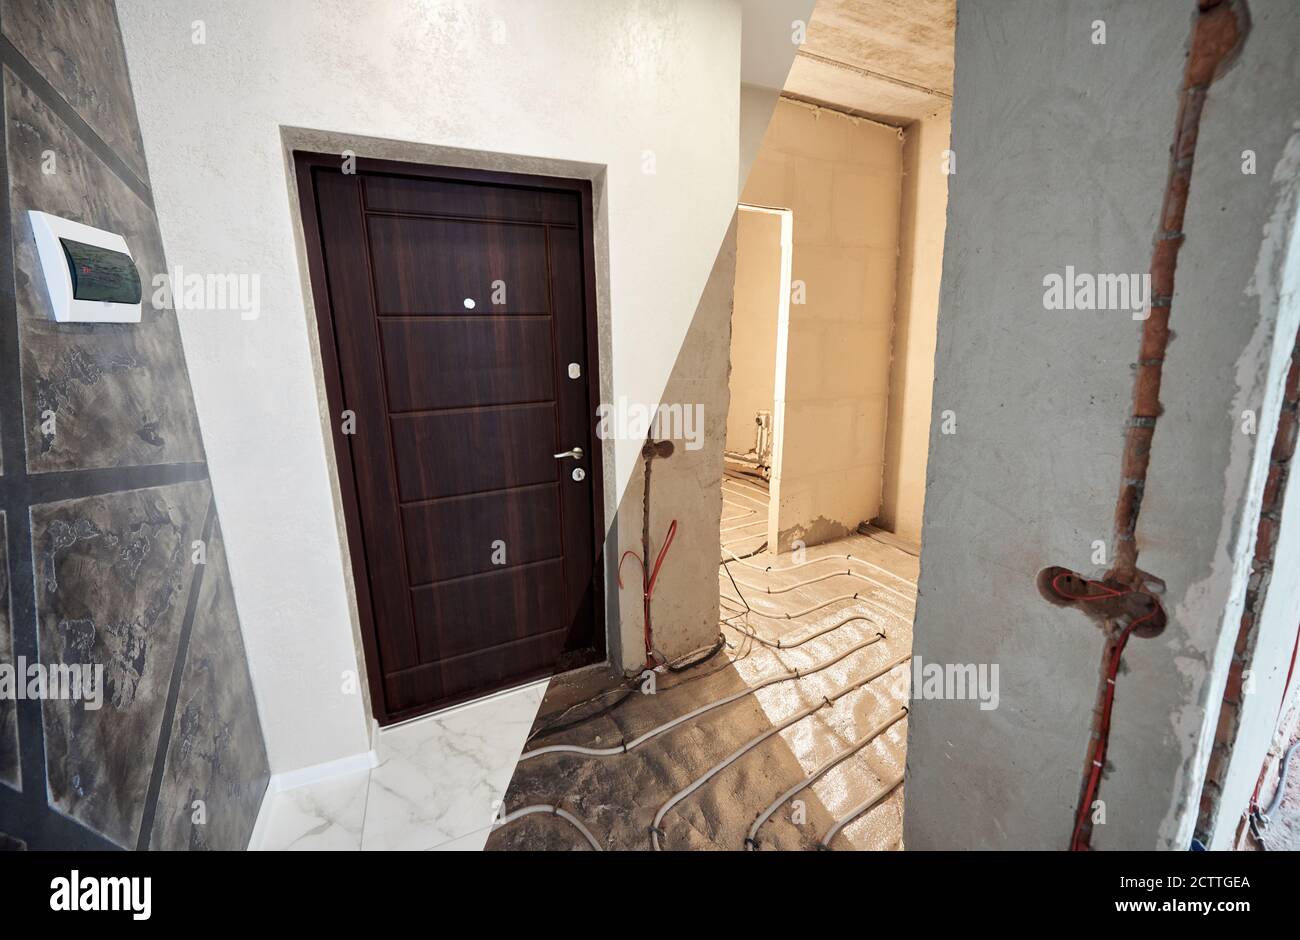 Modern apartment with front door before and after renovation. Comparison of old flat with underfloor heating pipes and new place with marble floor and brown entrance door. Stock Photo